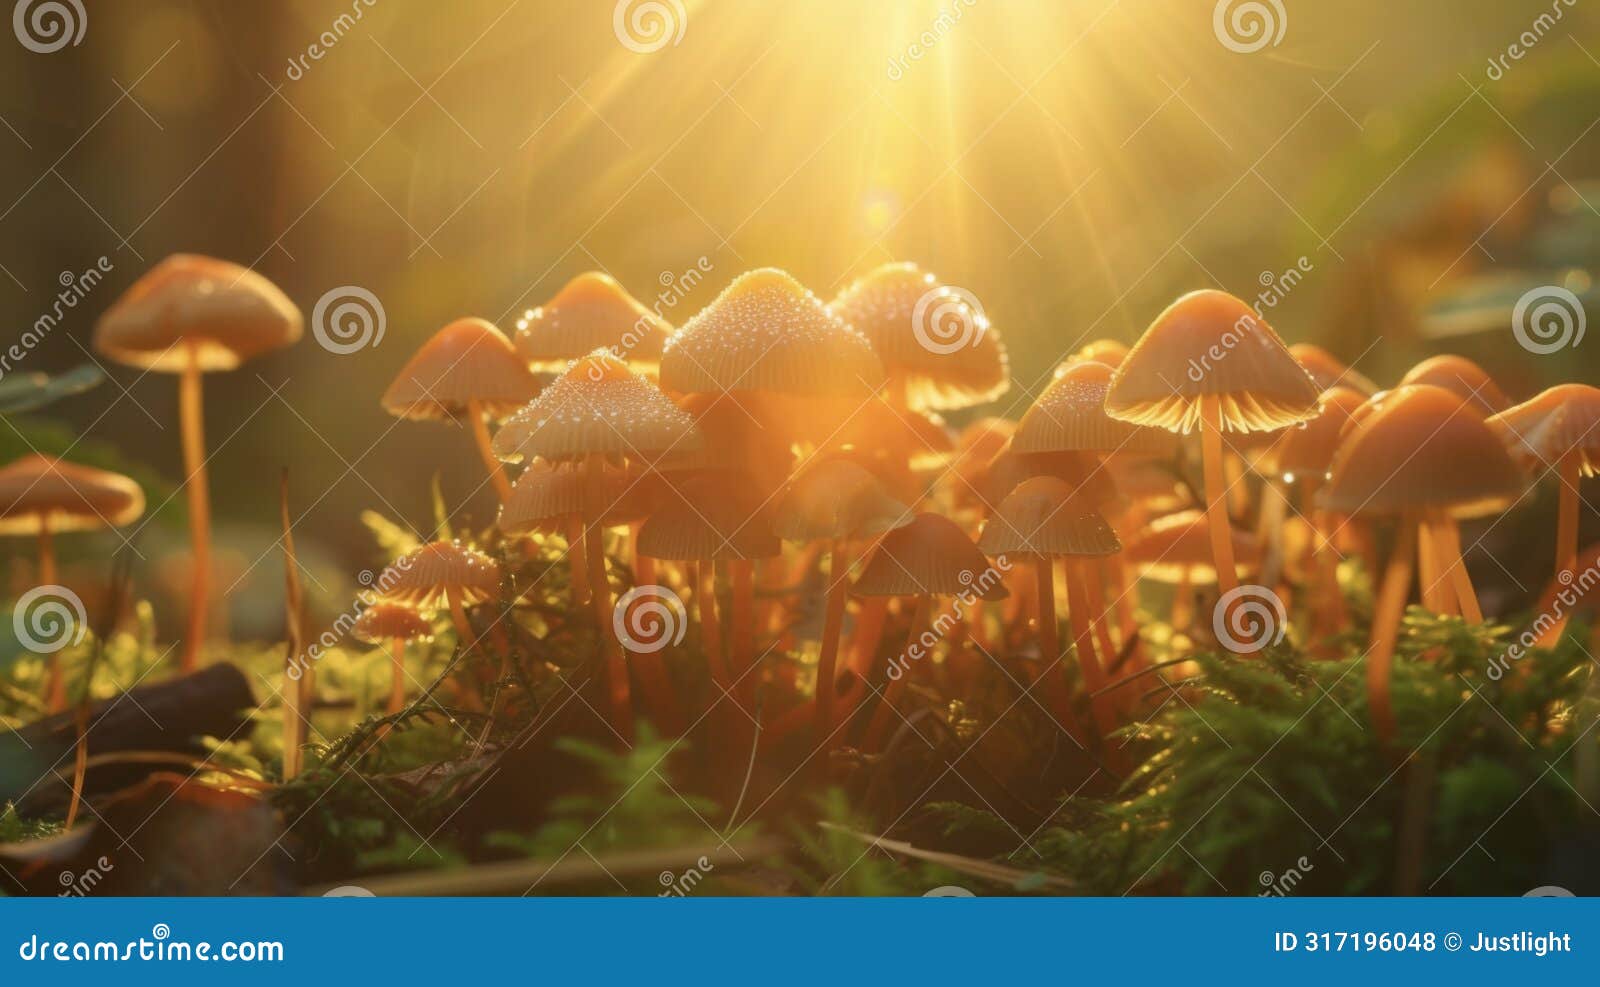 a group of tiny mushrooms their caps aglow with sunlight and creating a scene reminiscent of a fairytale